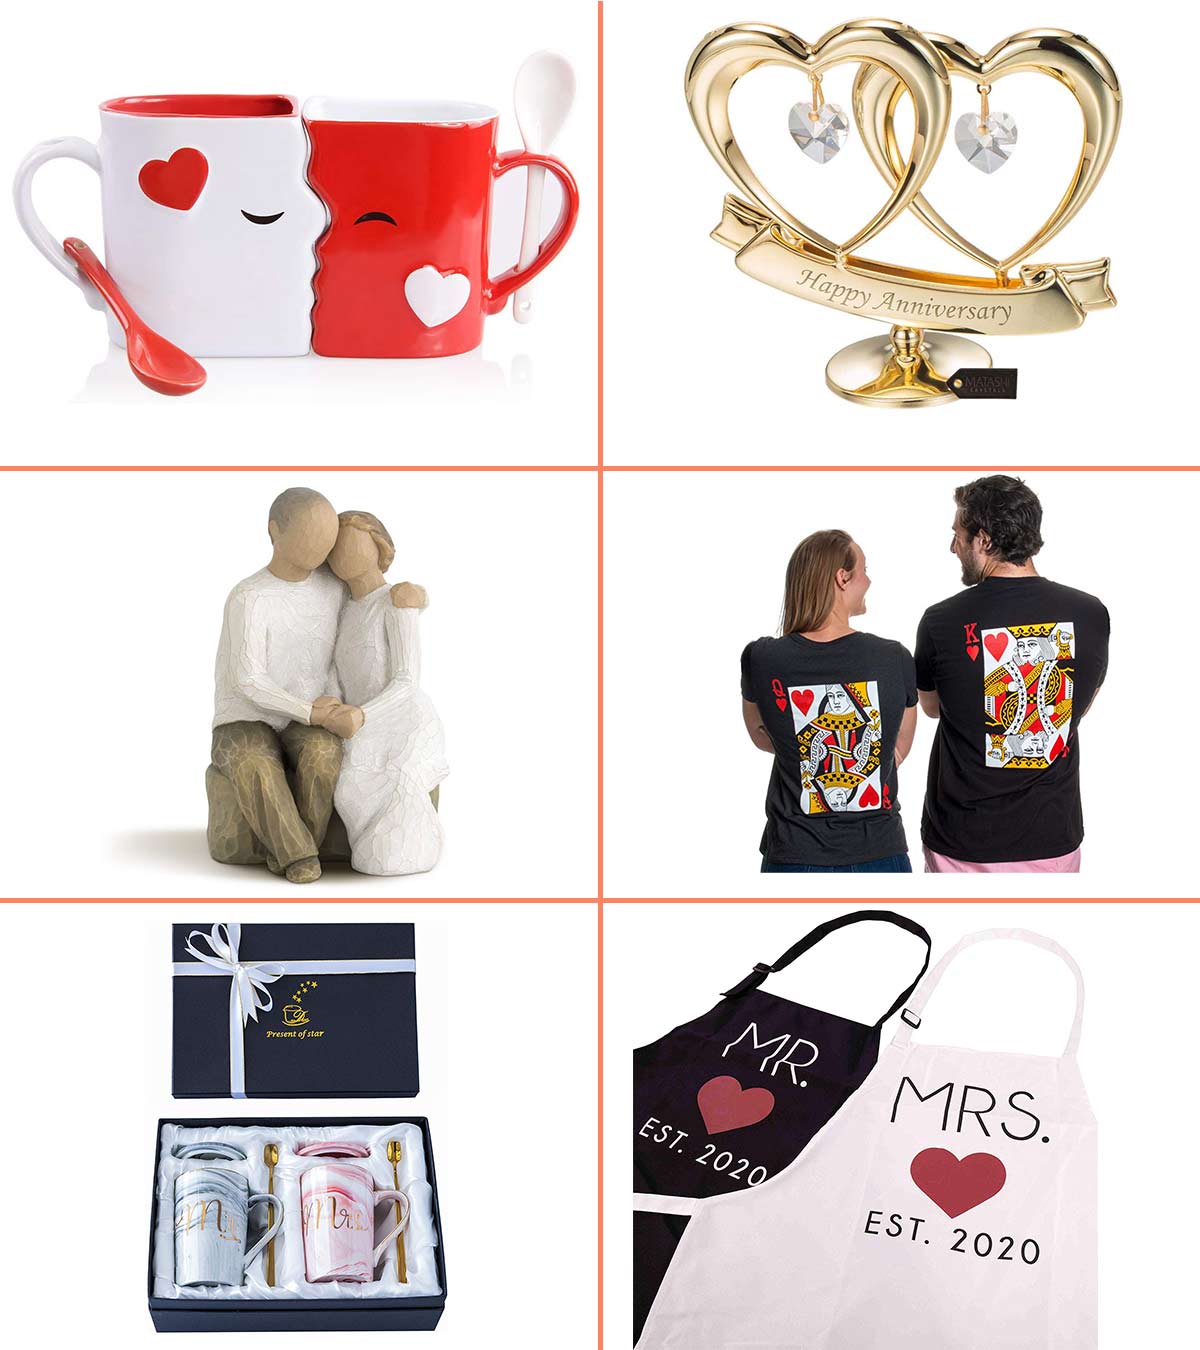 23 Best Wedding Anniversary Gifts In 2021 27 cute anniversary gifts for any boyfriend. 23 best wedding anniversary gifts in 2021